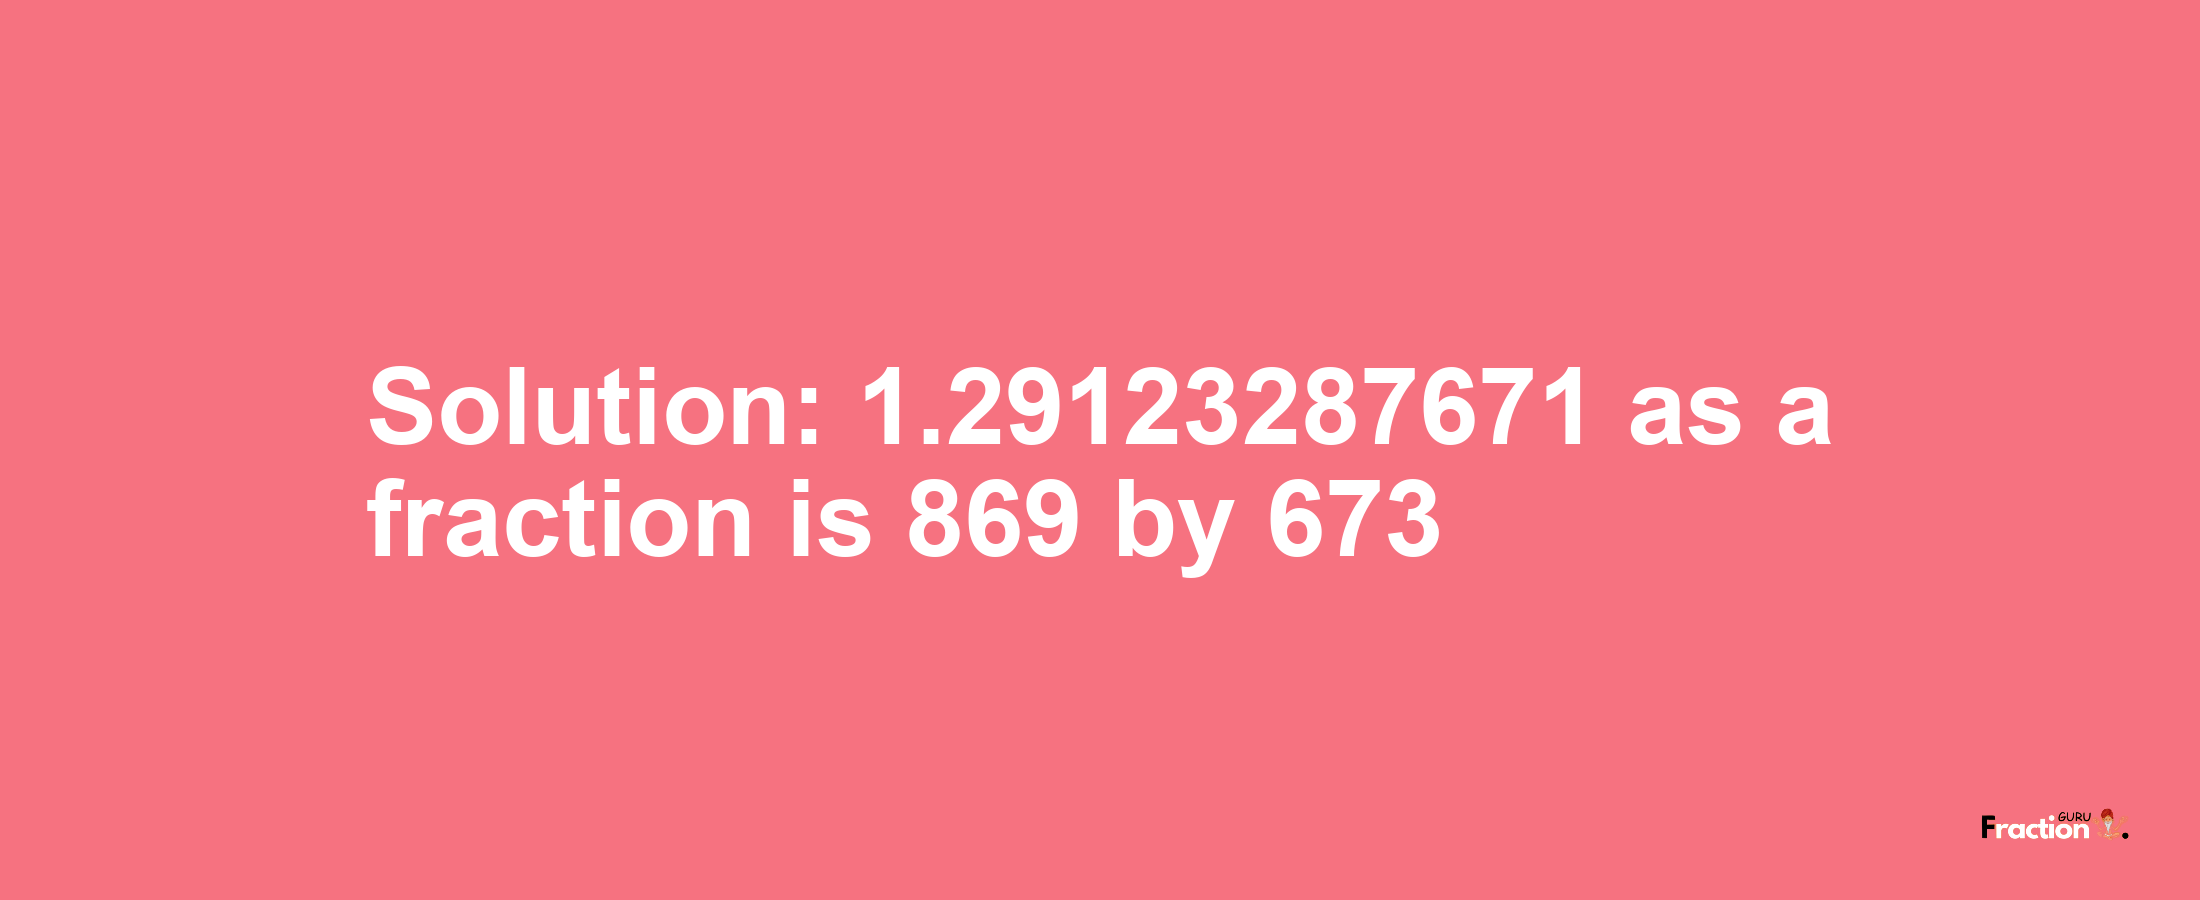 Solution:1.29123287671 as a fraction is 869/673